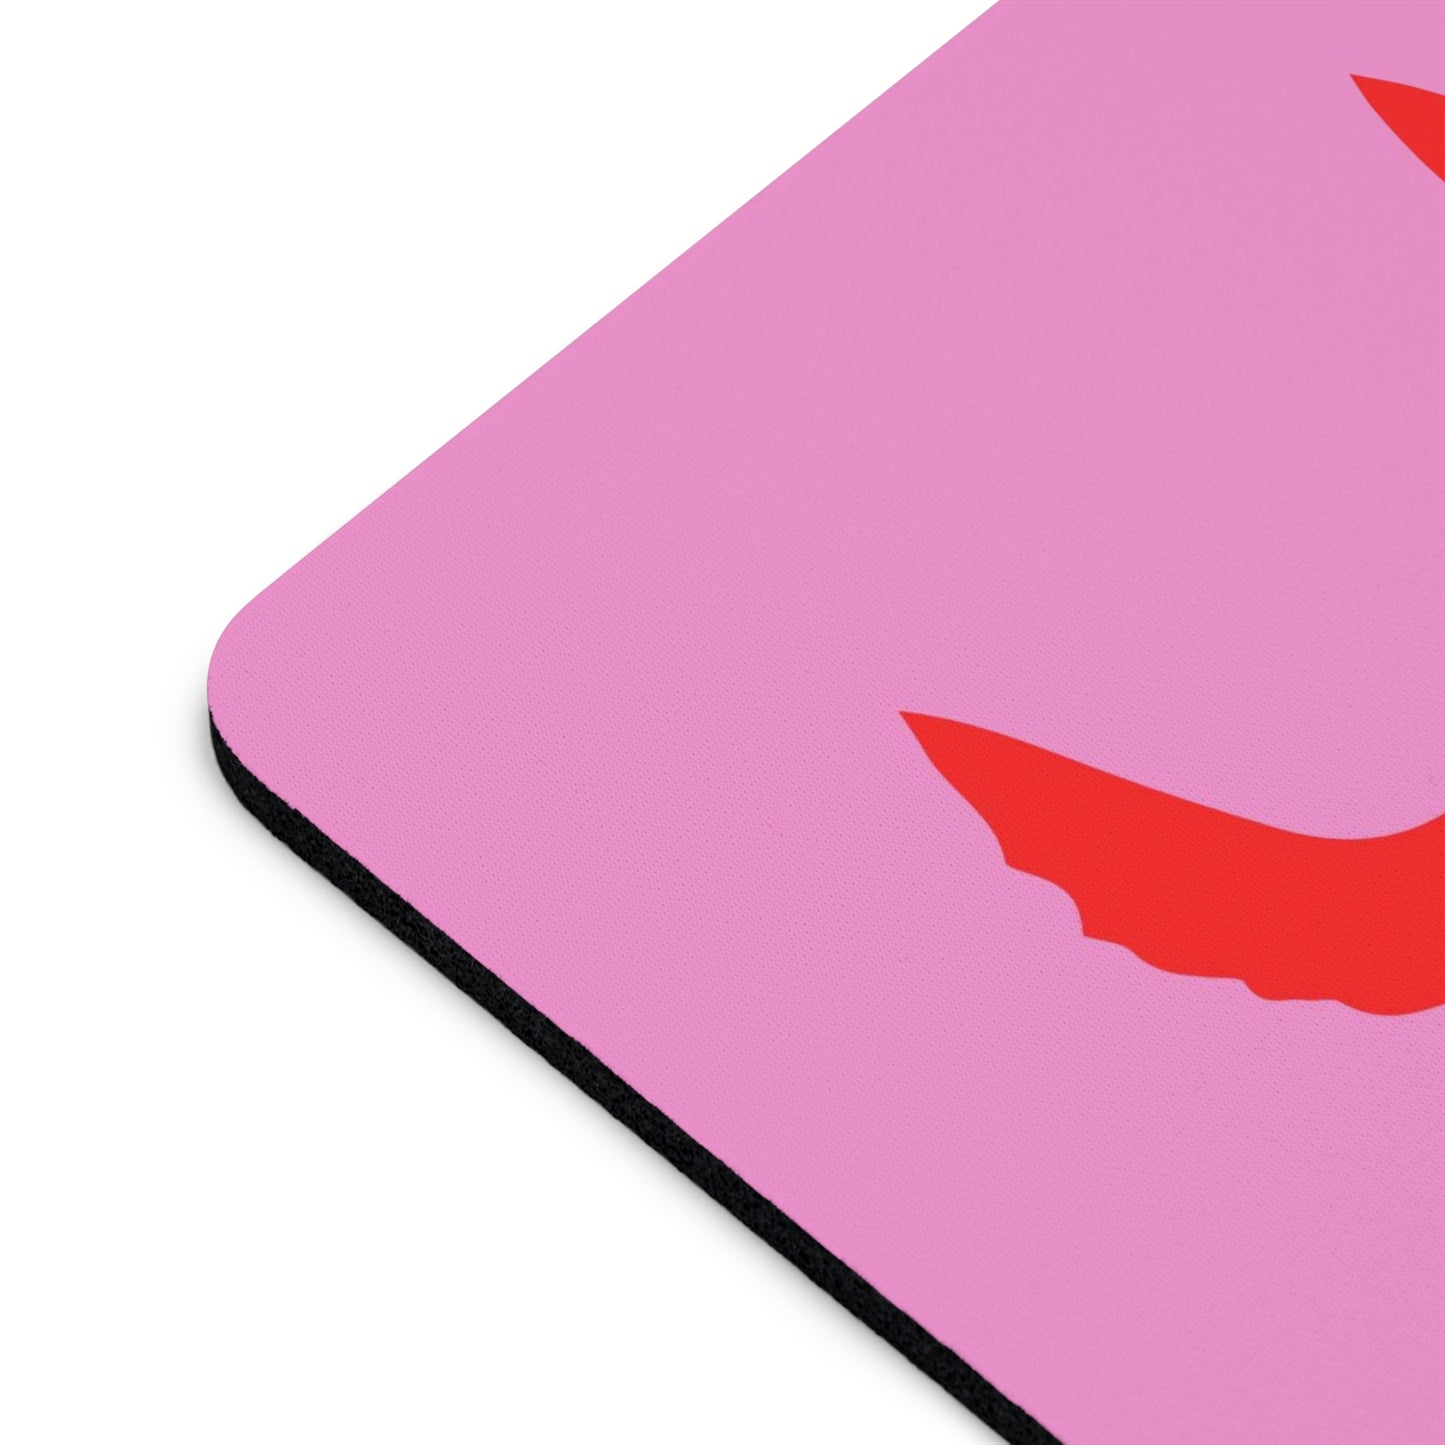 Mouse Pad Perky Red